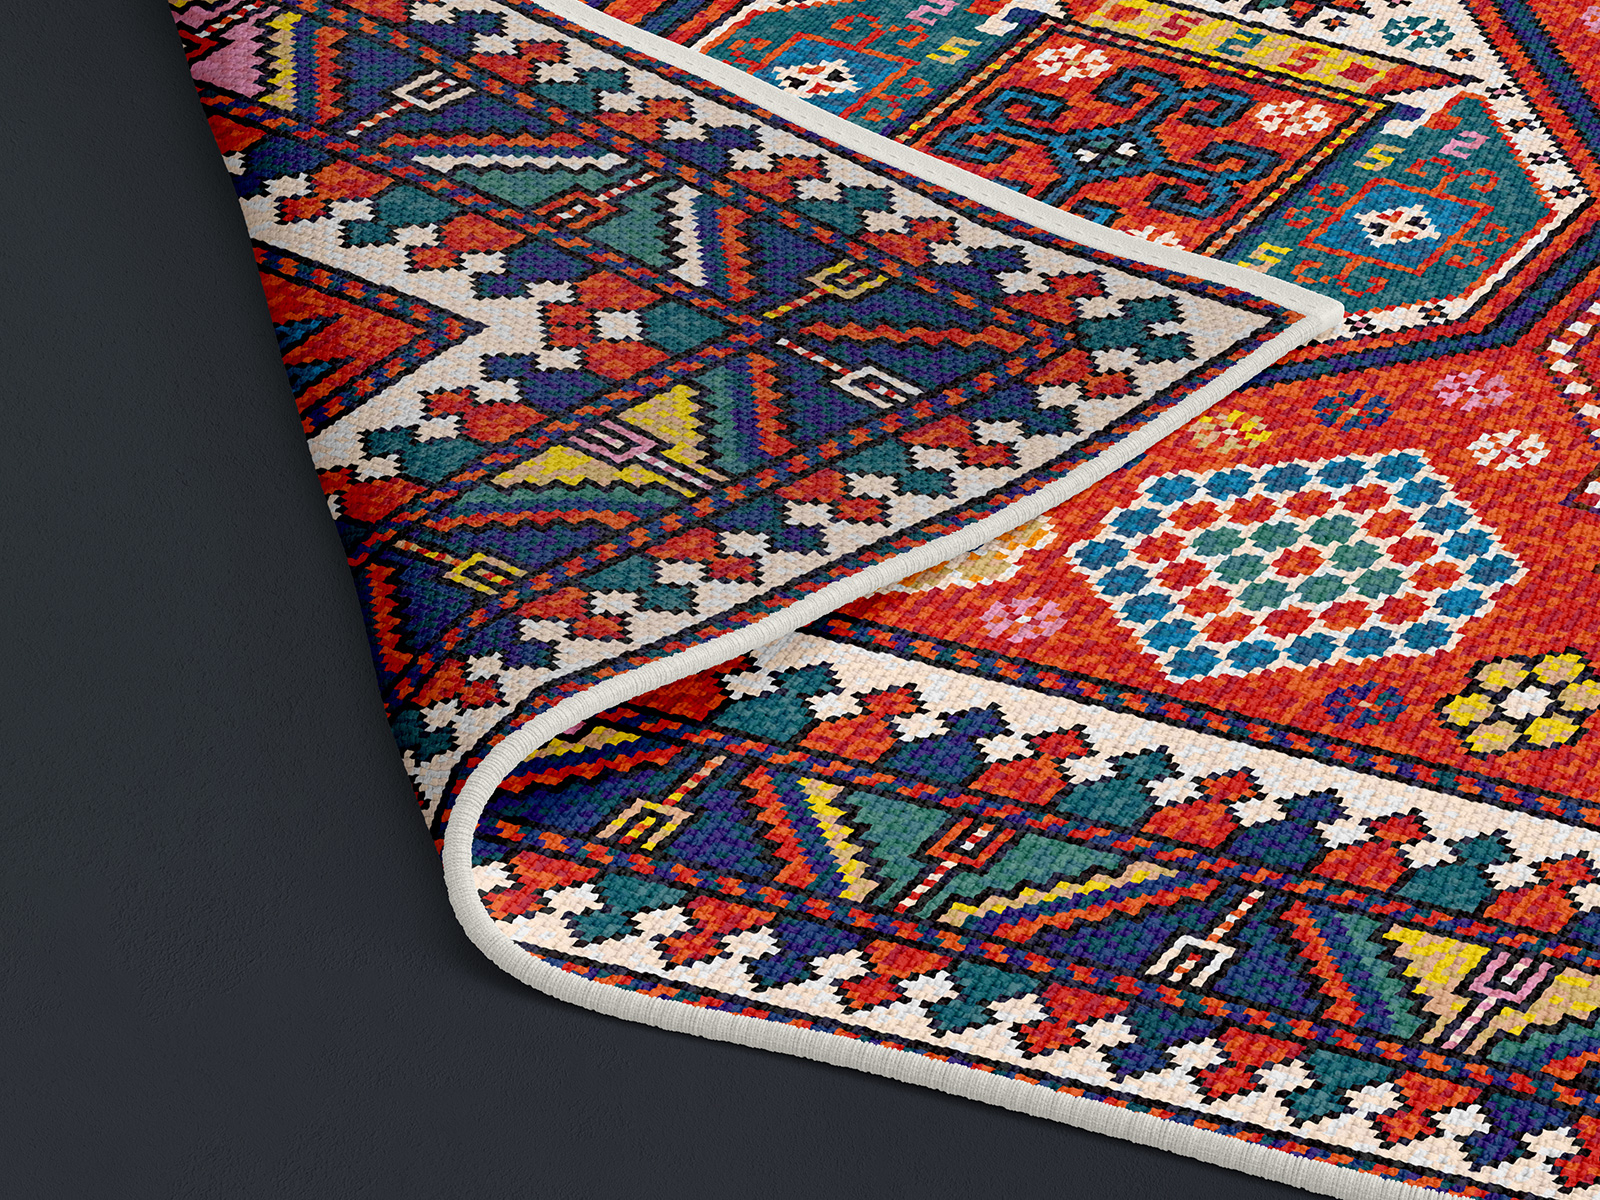 Download Woven Rug Mockup Set by Pixelbuddha on Dribbble